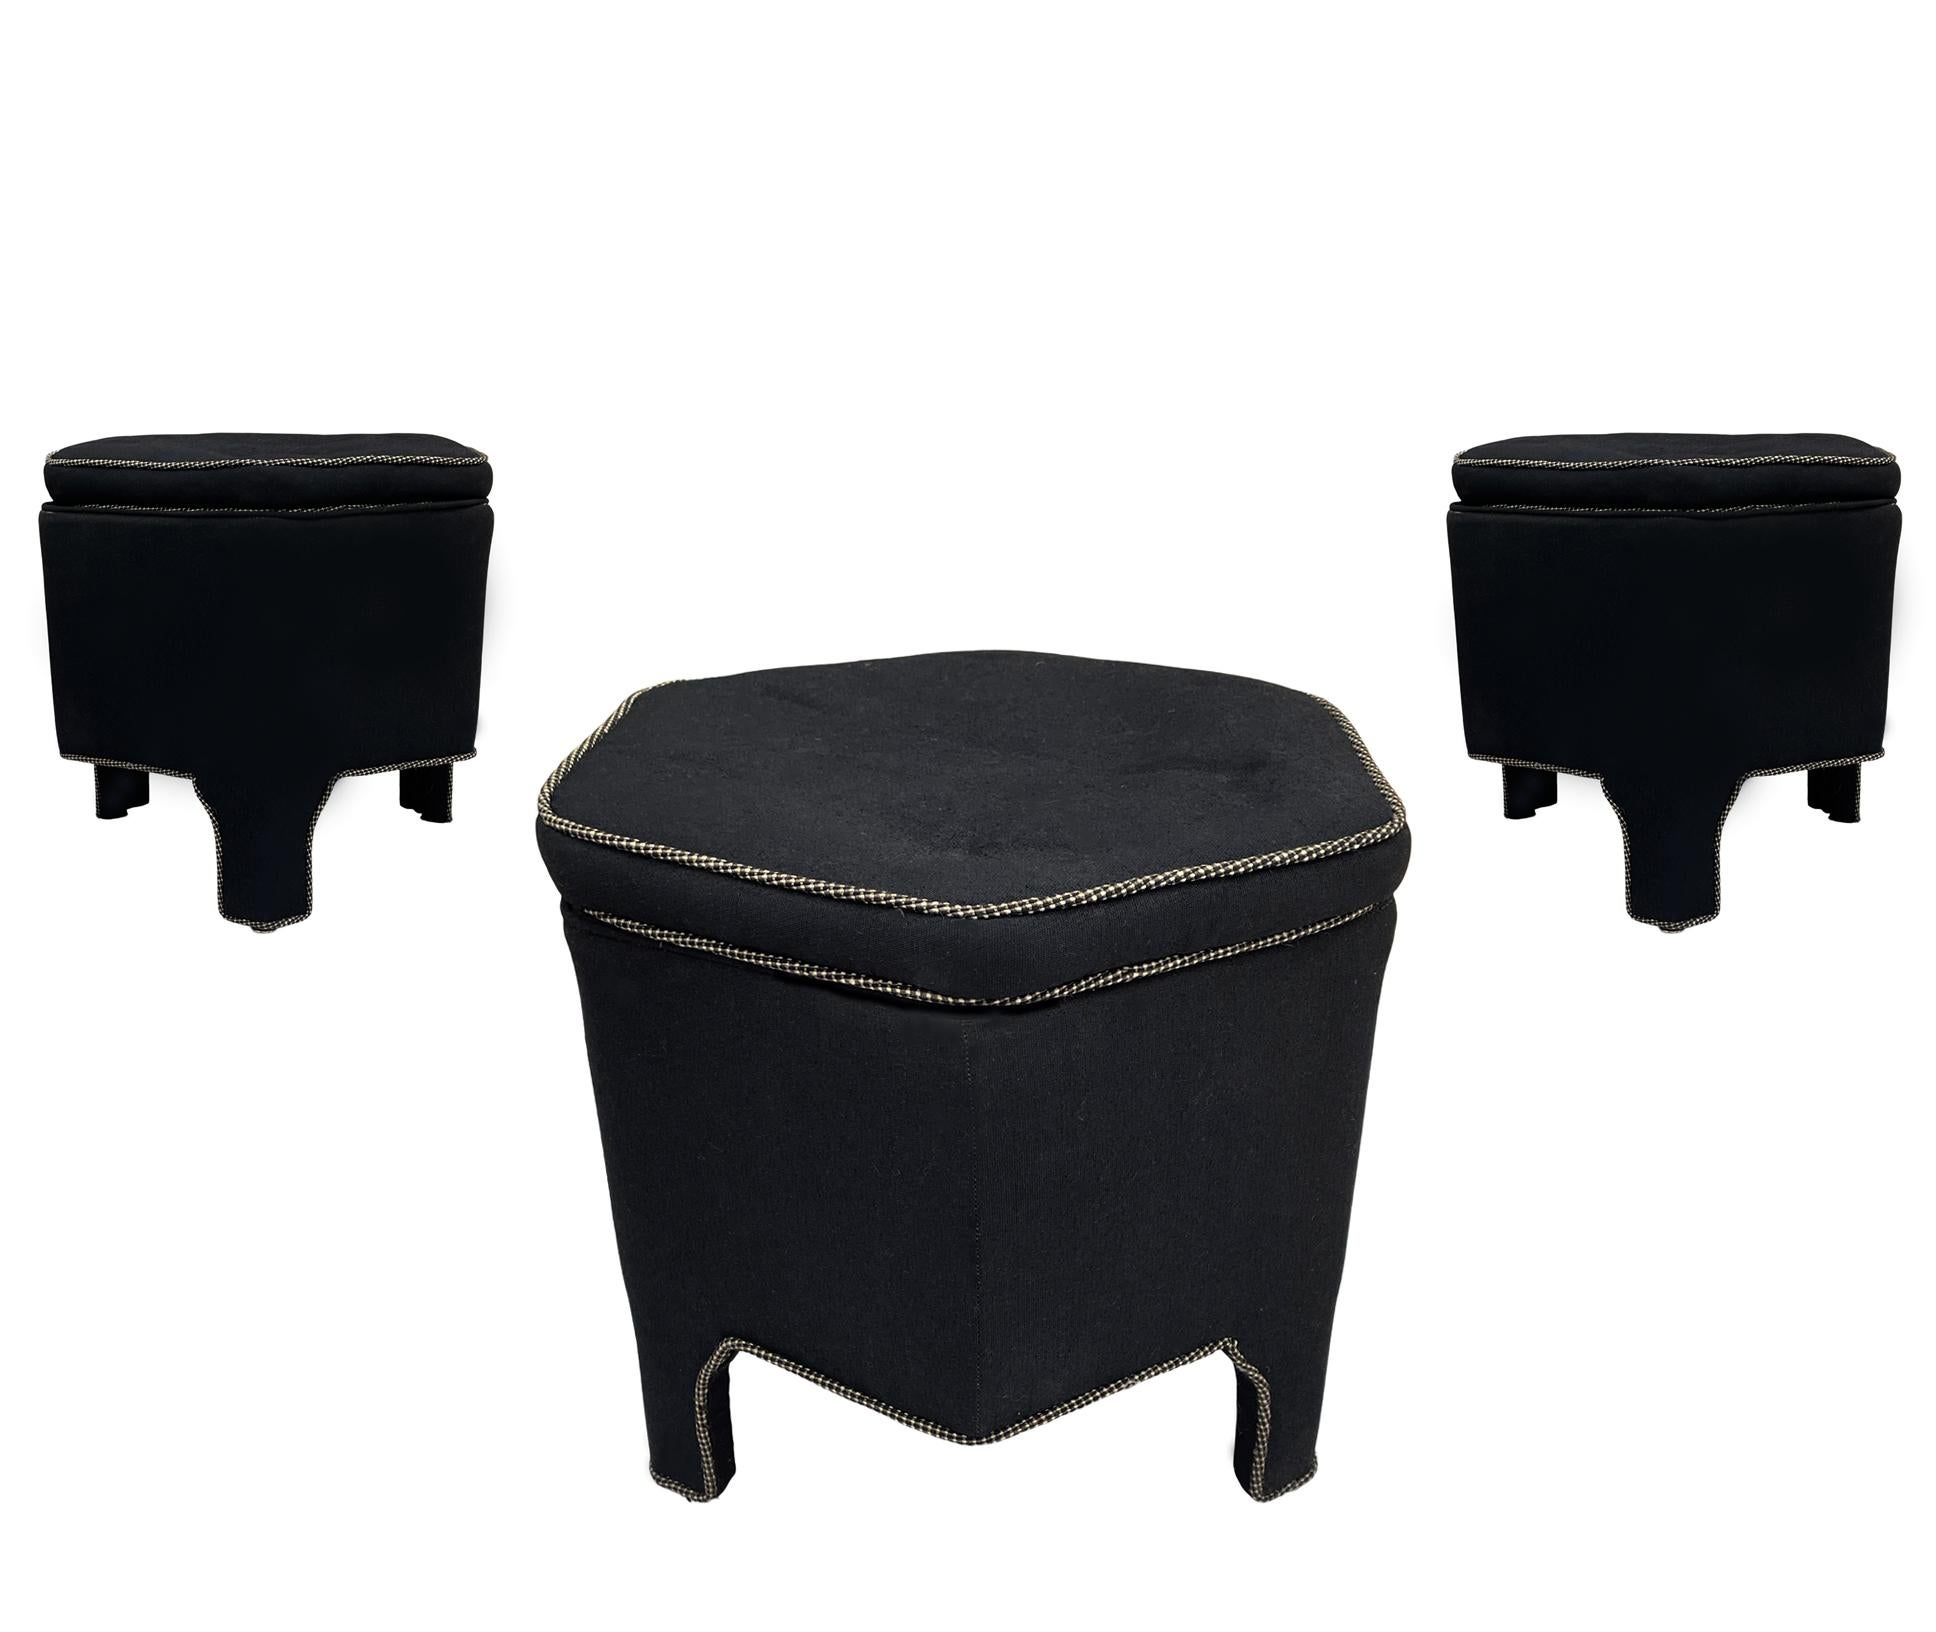 Mid-20th Century Trio of Mid-Century Modern Upholstered Stools or Benches in Hexagonal Form For Sale